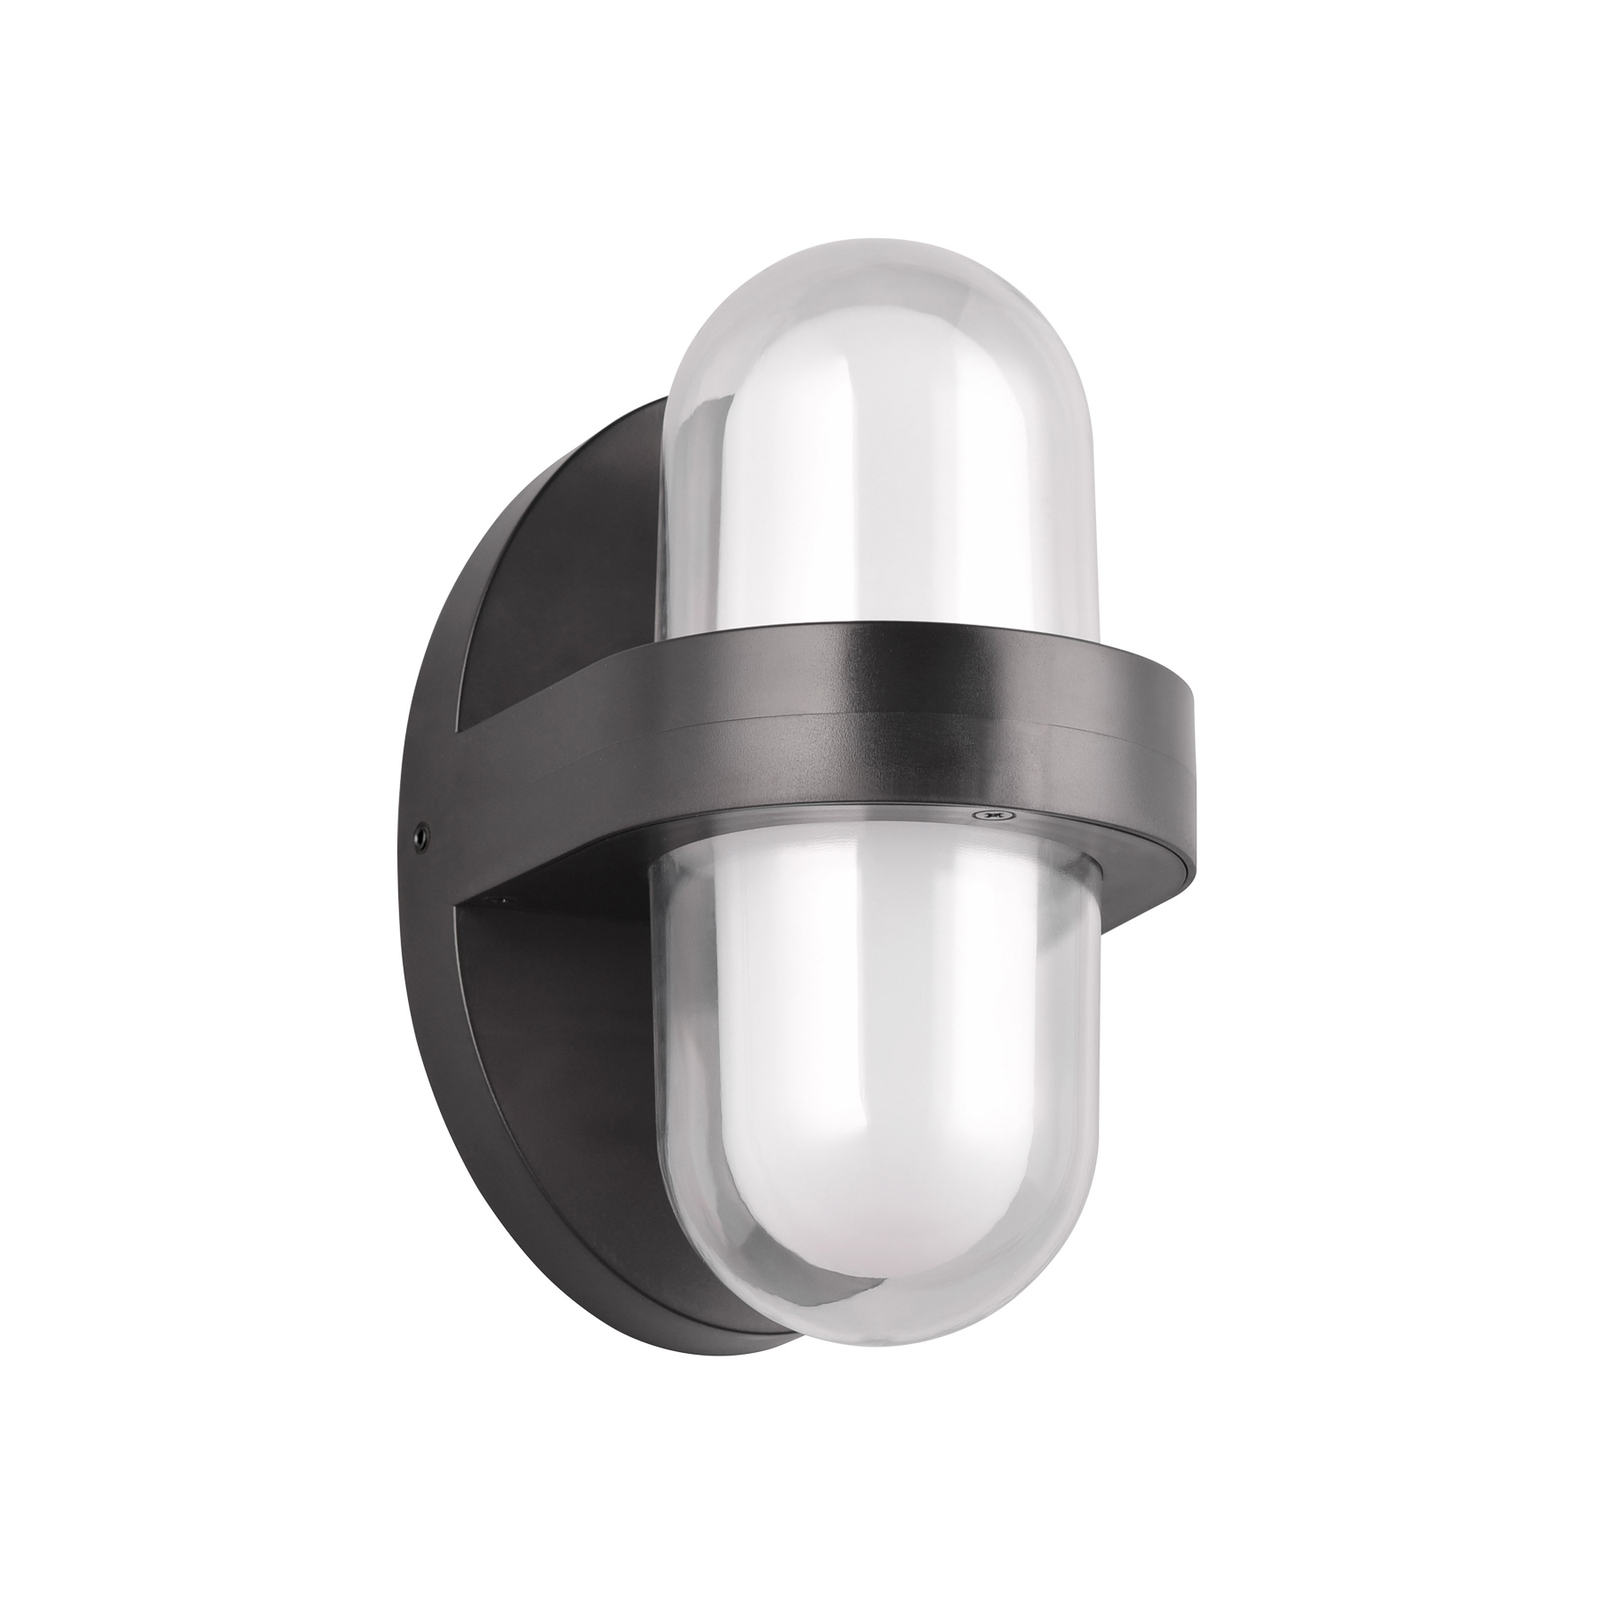 Limeira LED outdoor wall light, round